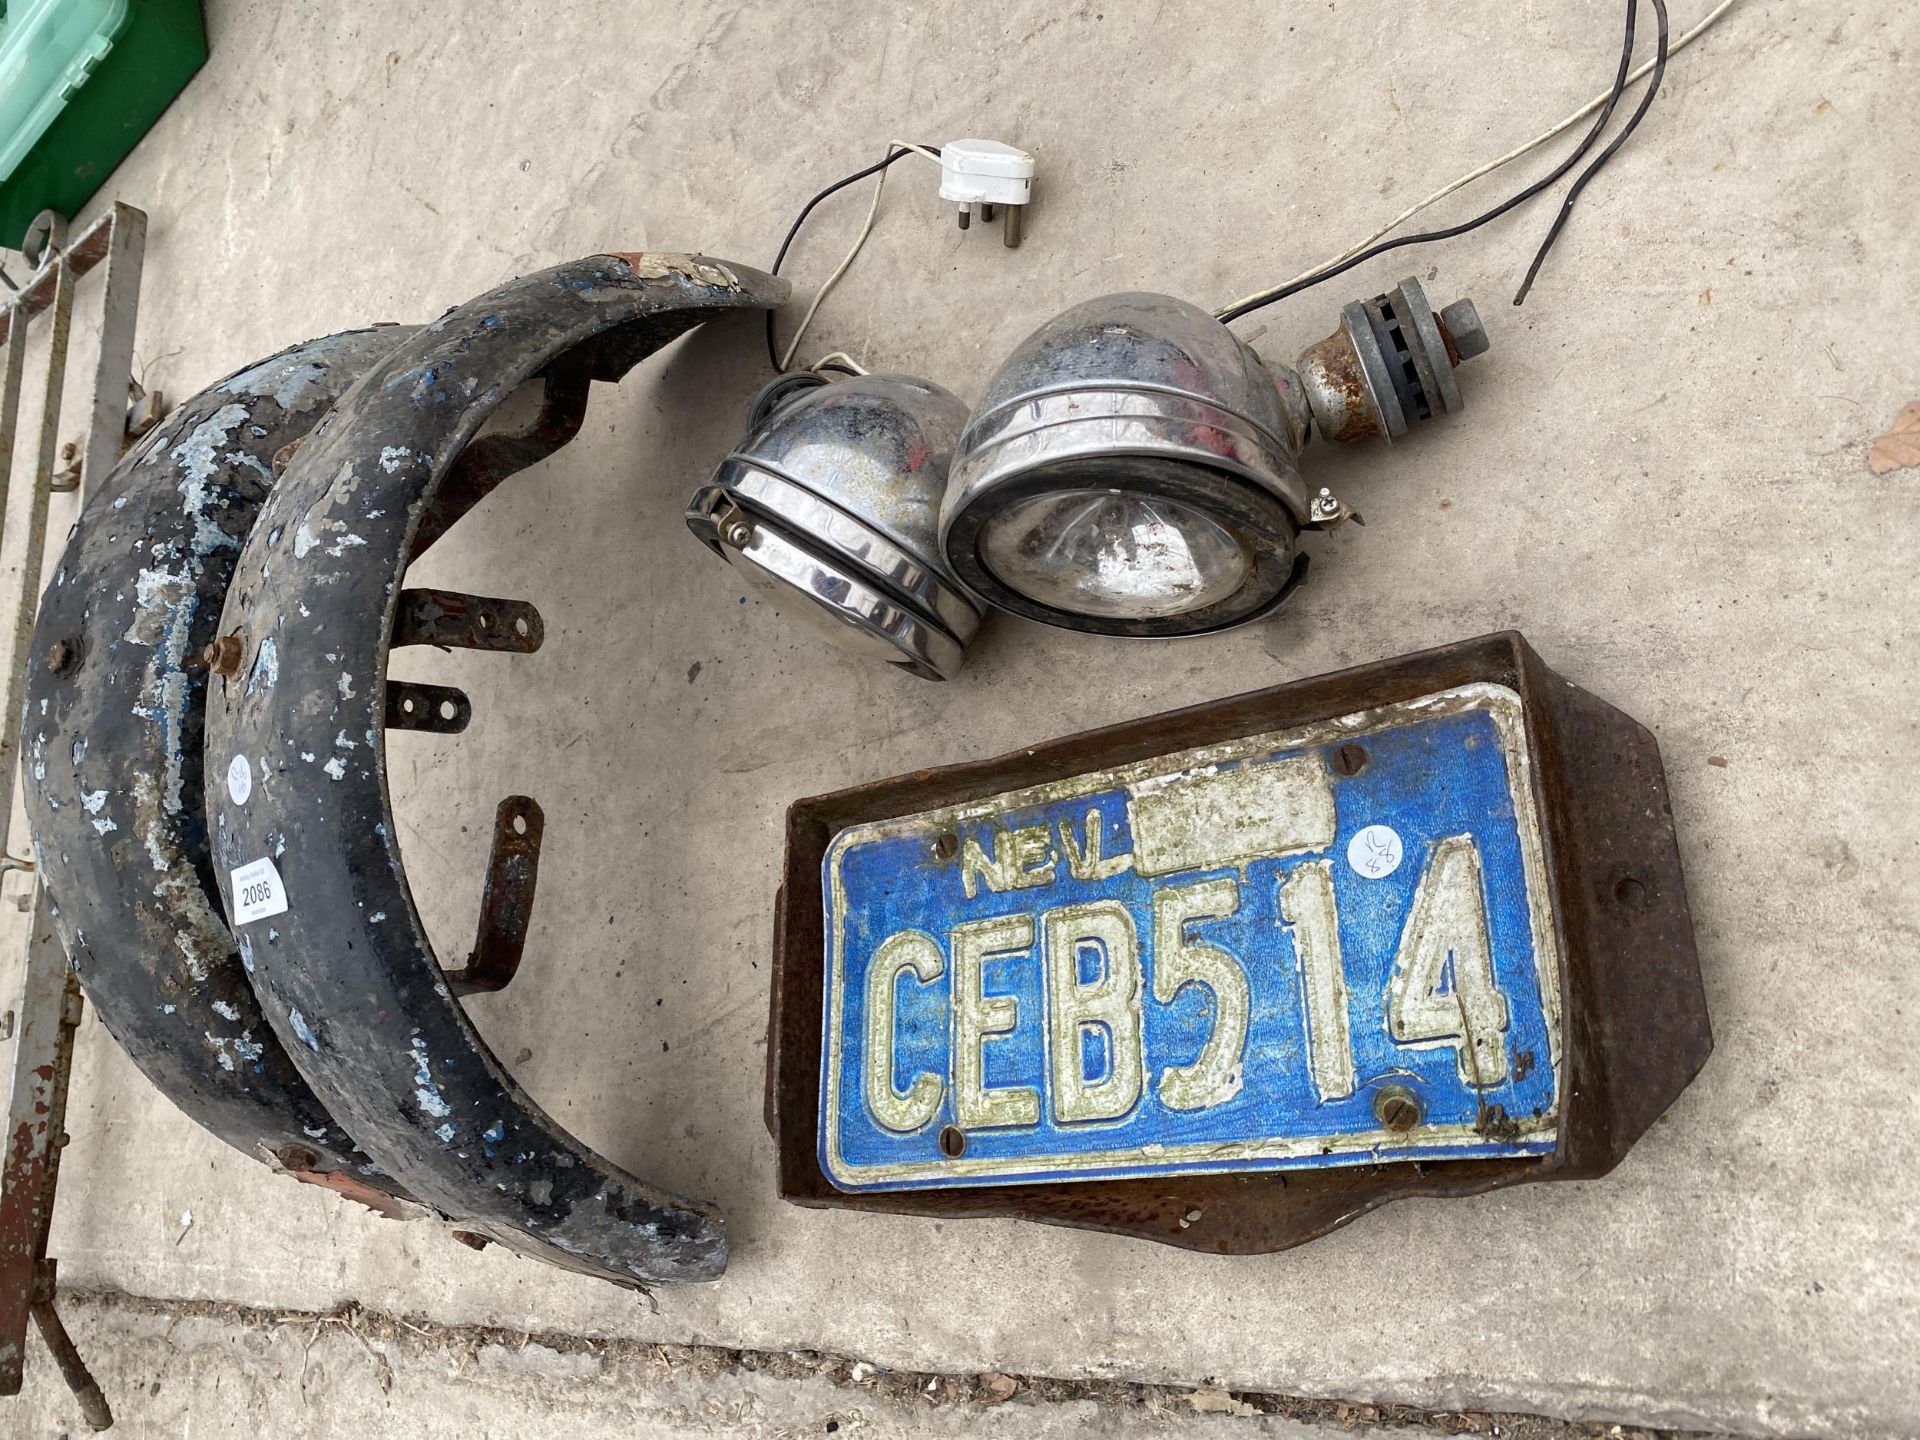 A COLLECTION OF VINTAGE MOTORCYCLE SPARES TO INCLUDE LIGHTS, MUDGUARDS, ETC - Image 2 of 2